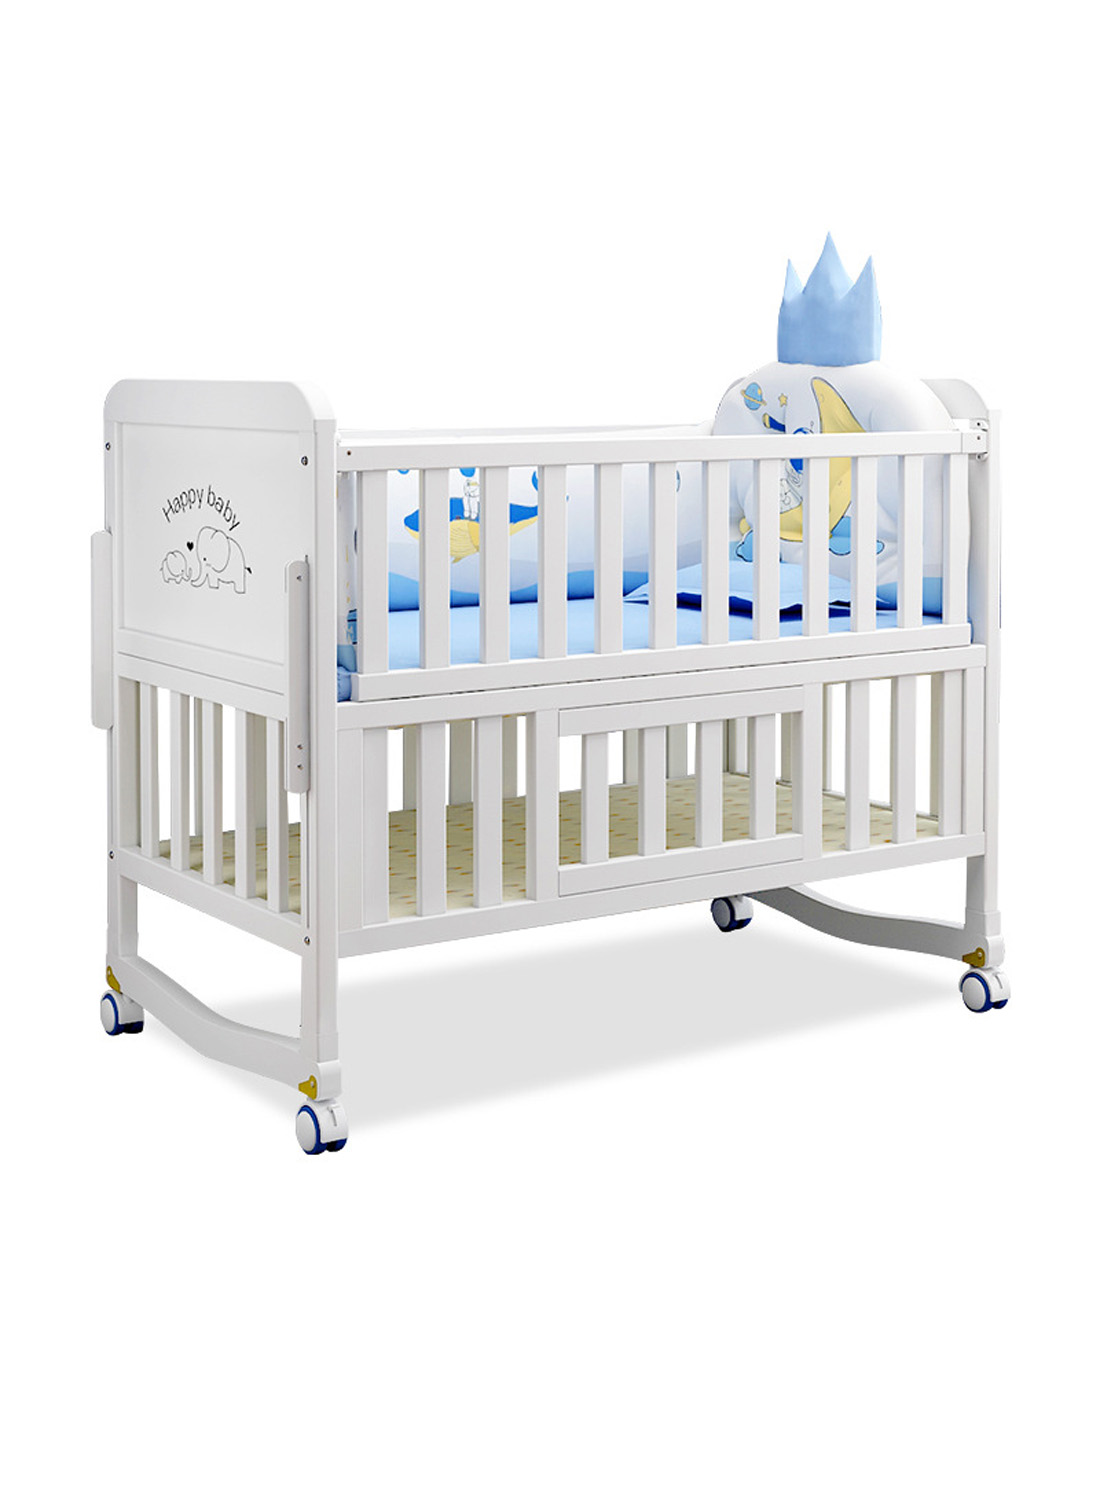 Baby Crib Solid Wood Environmentally Friendly European Multifunctional Splicing King-Size Bed Baby Bb Removable Newborn Children's Cradle Beds